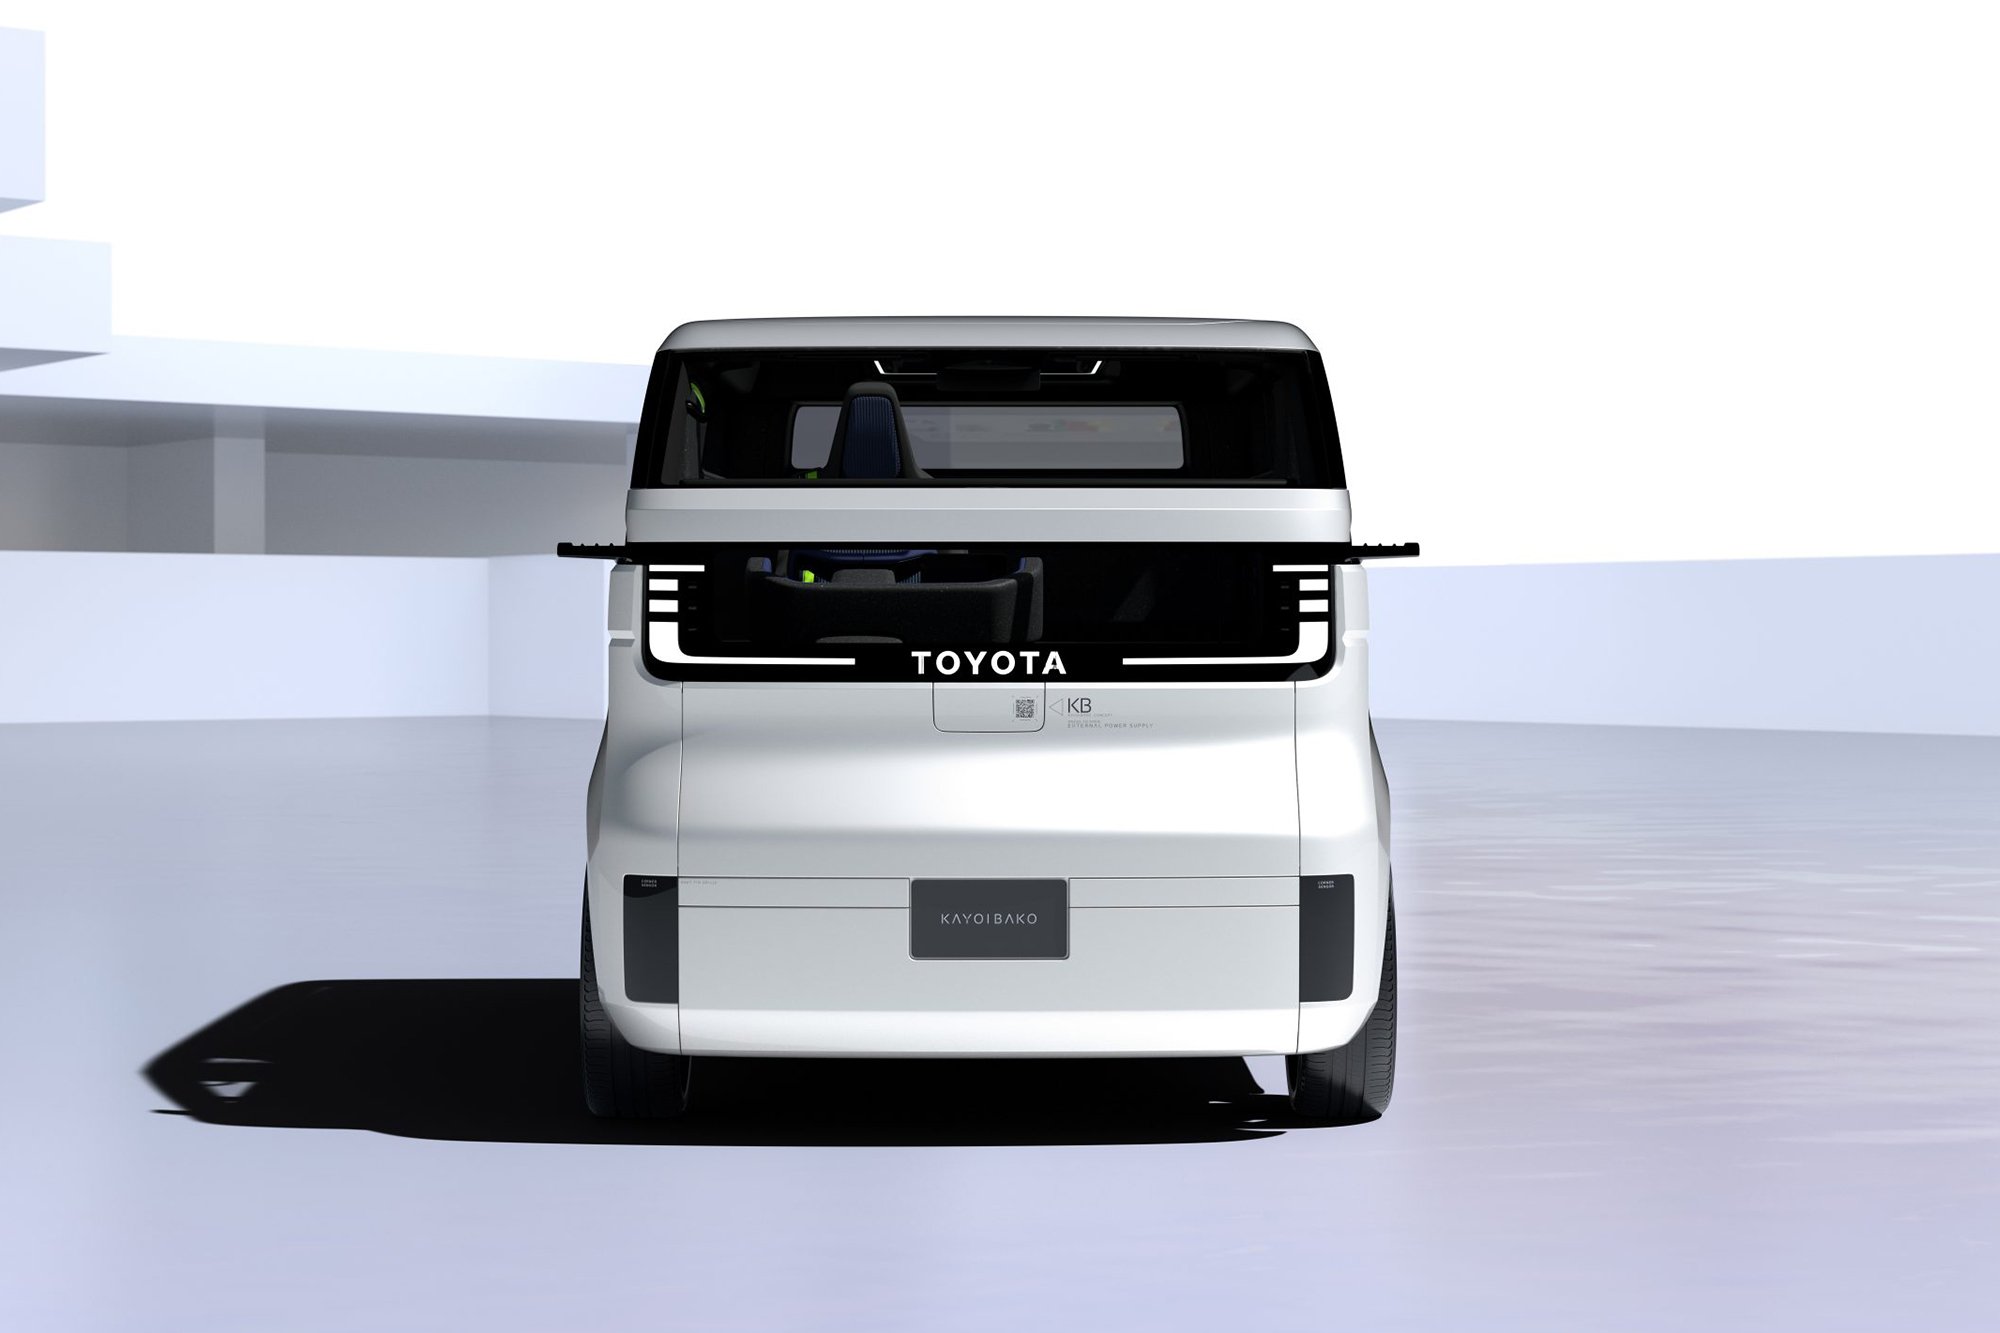 Front design of Toyota Kayoibako – the inspiring concept of a customisable battery electric vehicle